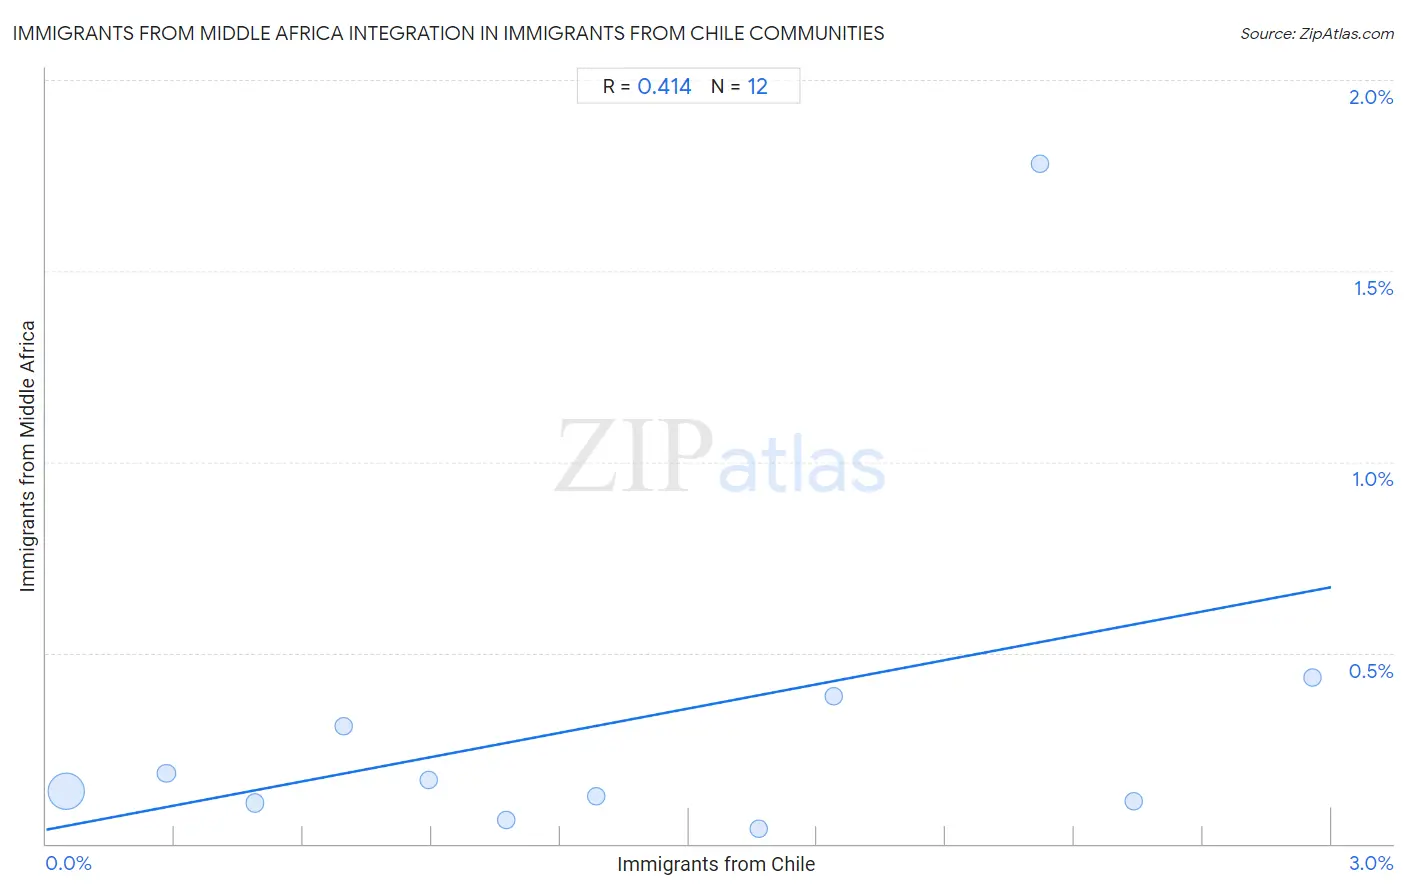 Immigrants from Chile Integration in Immigrants from Middle Africa Communities